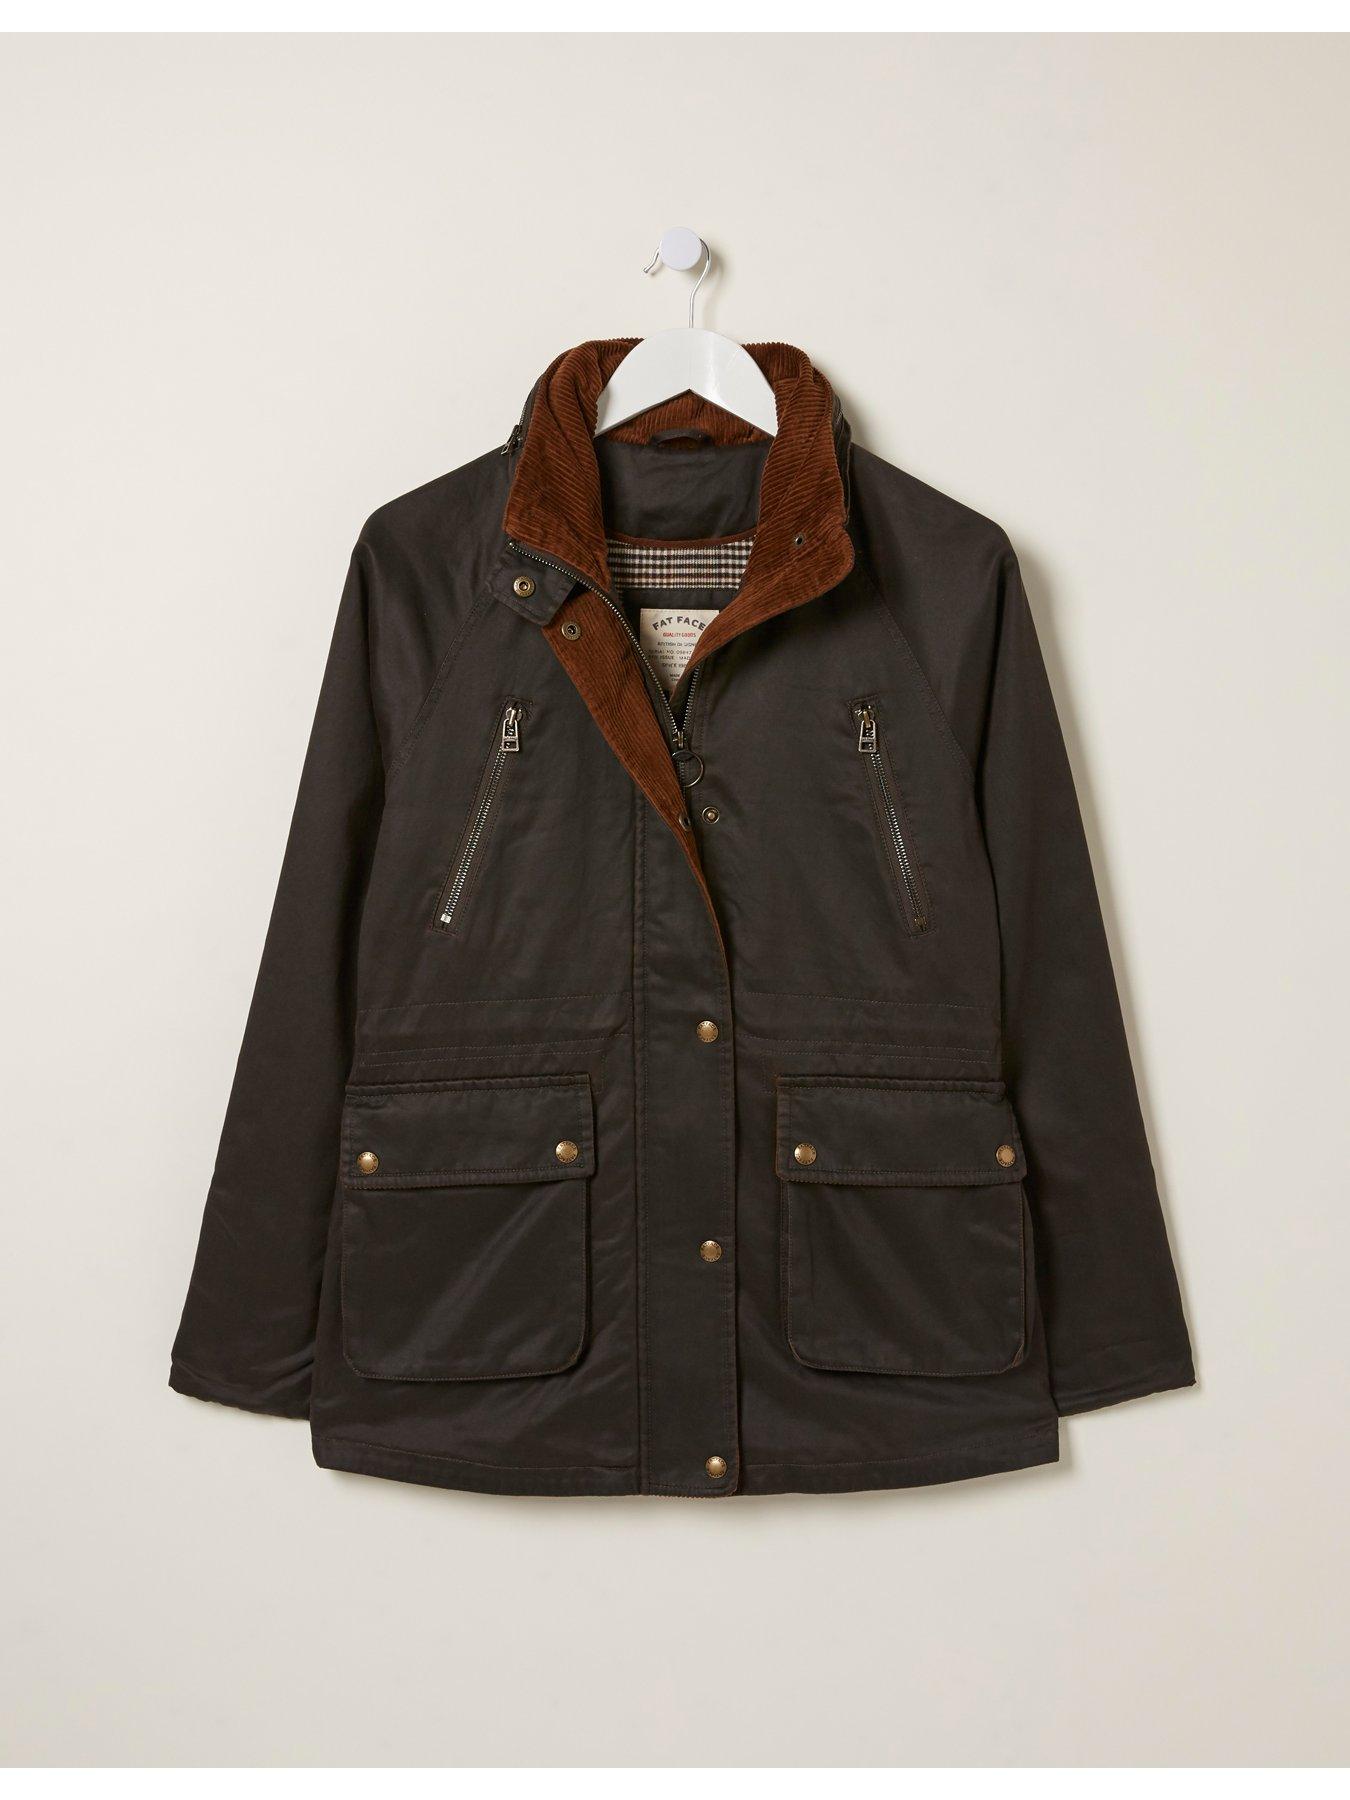 FatFace Sussex Jacket - Brown | very.co.uk